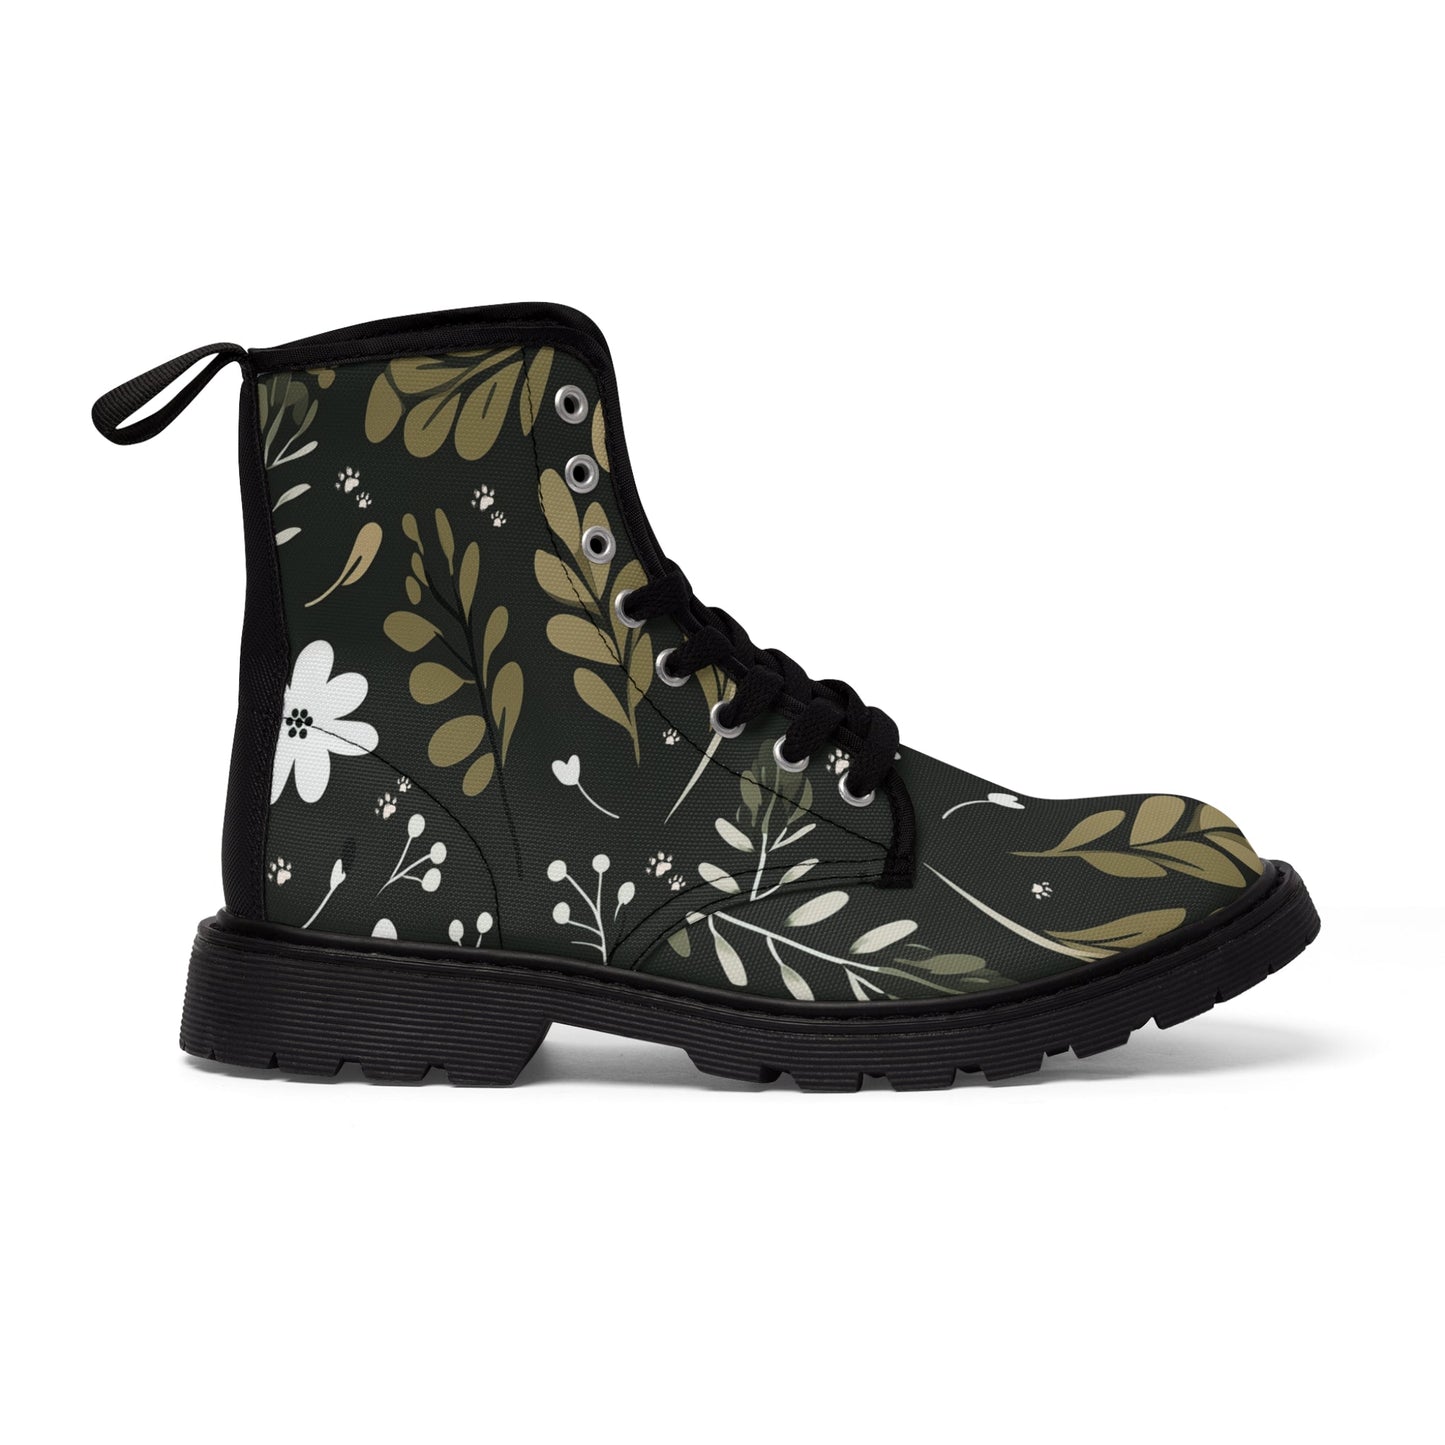 Women's Canvas Boots Featuring a Green Boho Flower and Paw Print Design - Hobbster